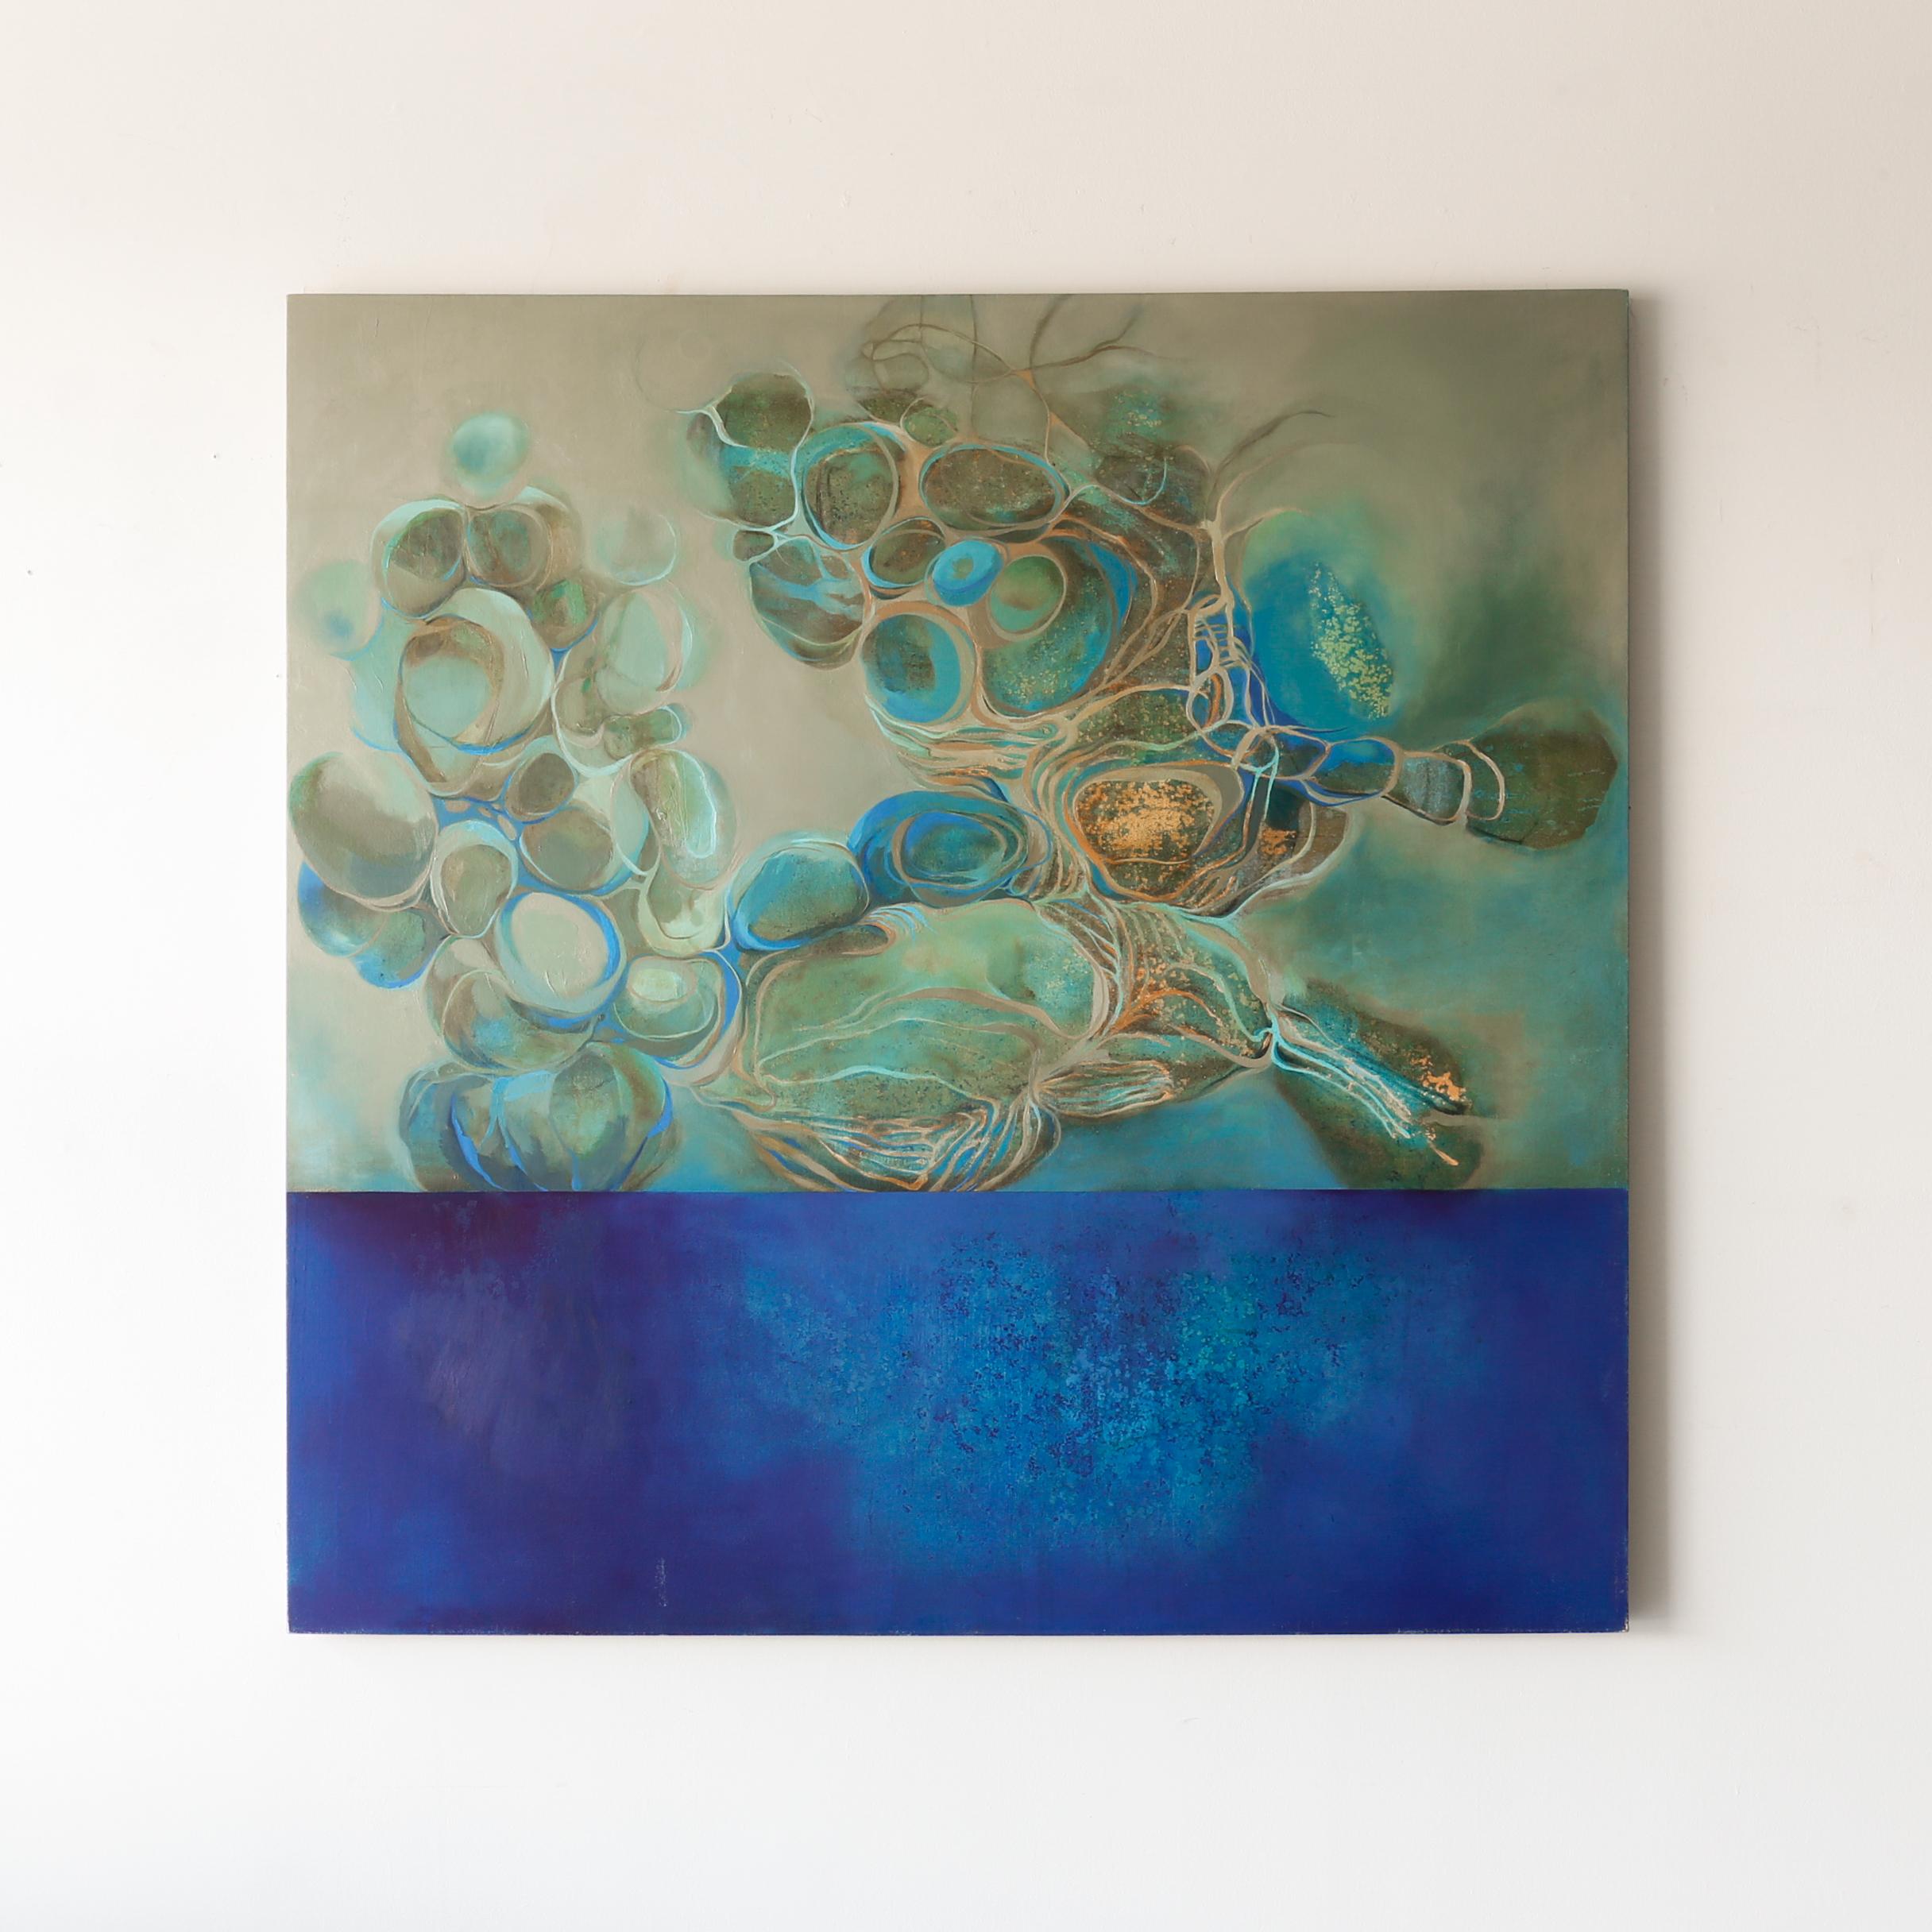 Contortionist by artist Jen Bradford is a contemporary abstract blue, light blue, and turquoise that measures 60 x 60 and is priced at $6,800

Several themes recur as a private narrative while I work, but aren’t always explicit. They include ideas